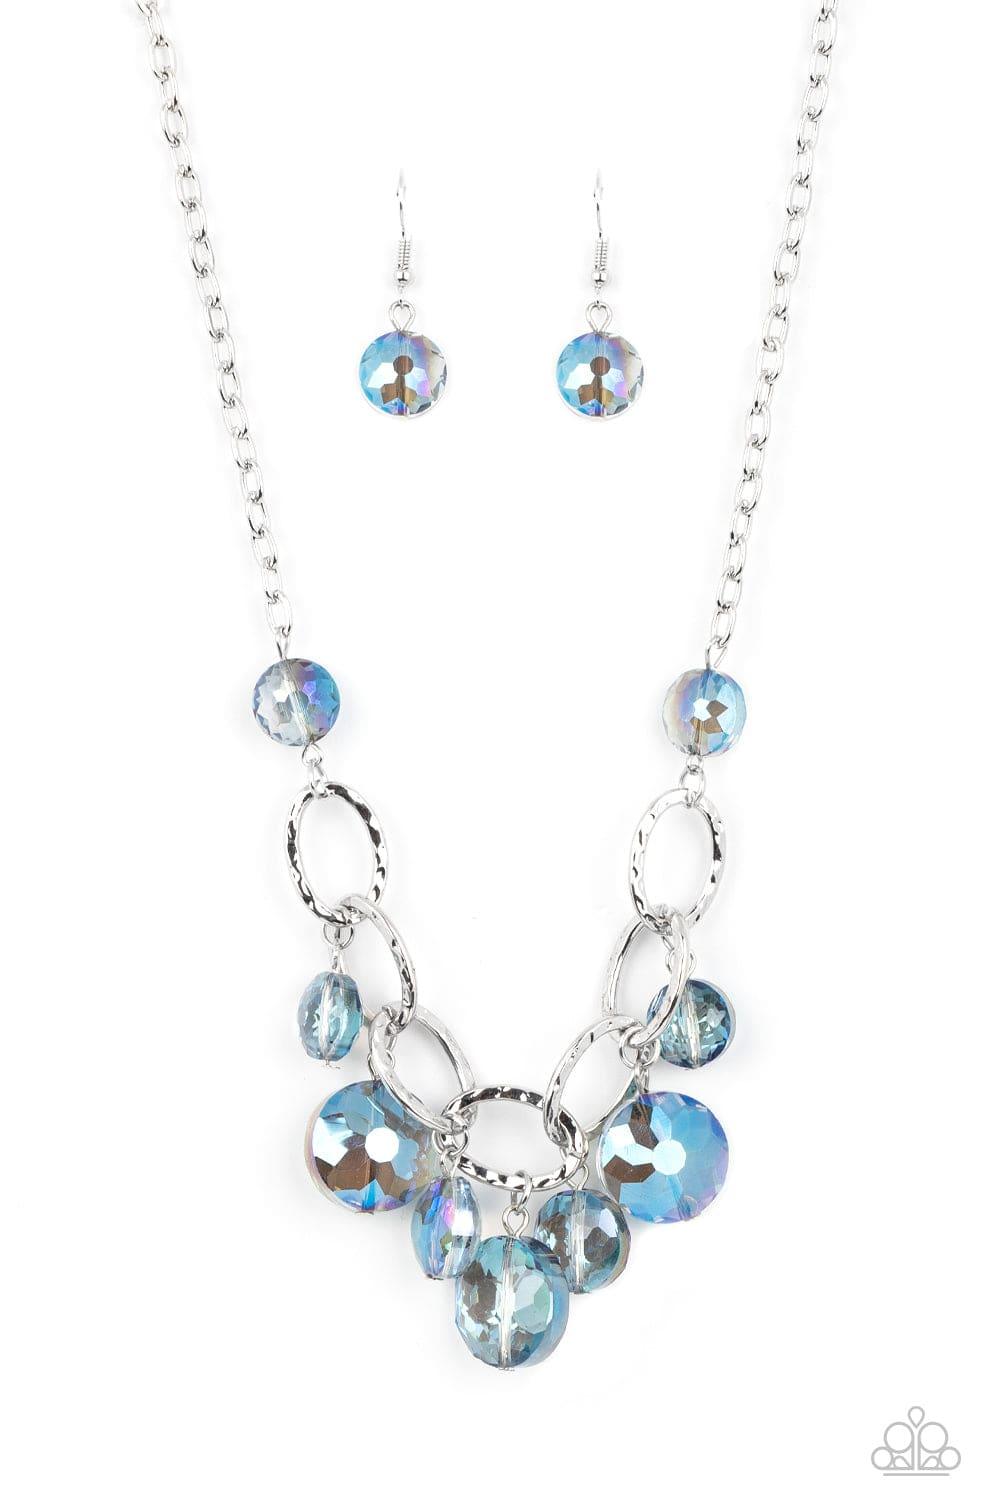 Paparazzi Accessories - Rhinestone River - Blue Necklace - Bling by JessieK